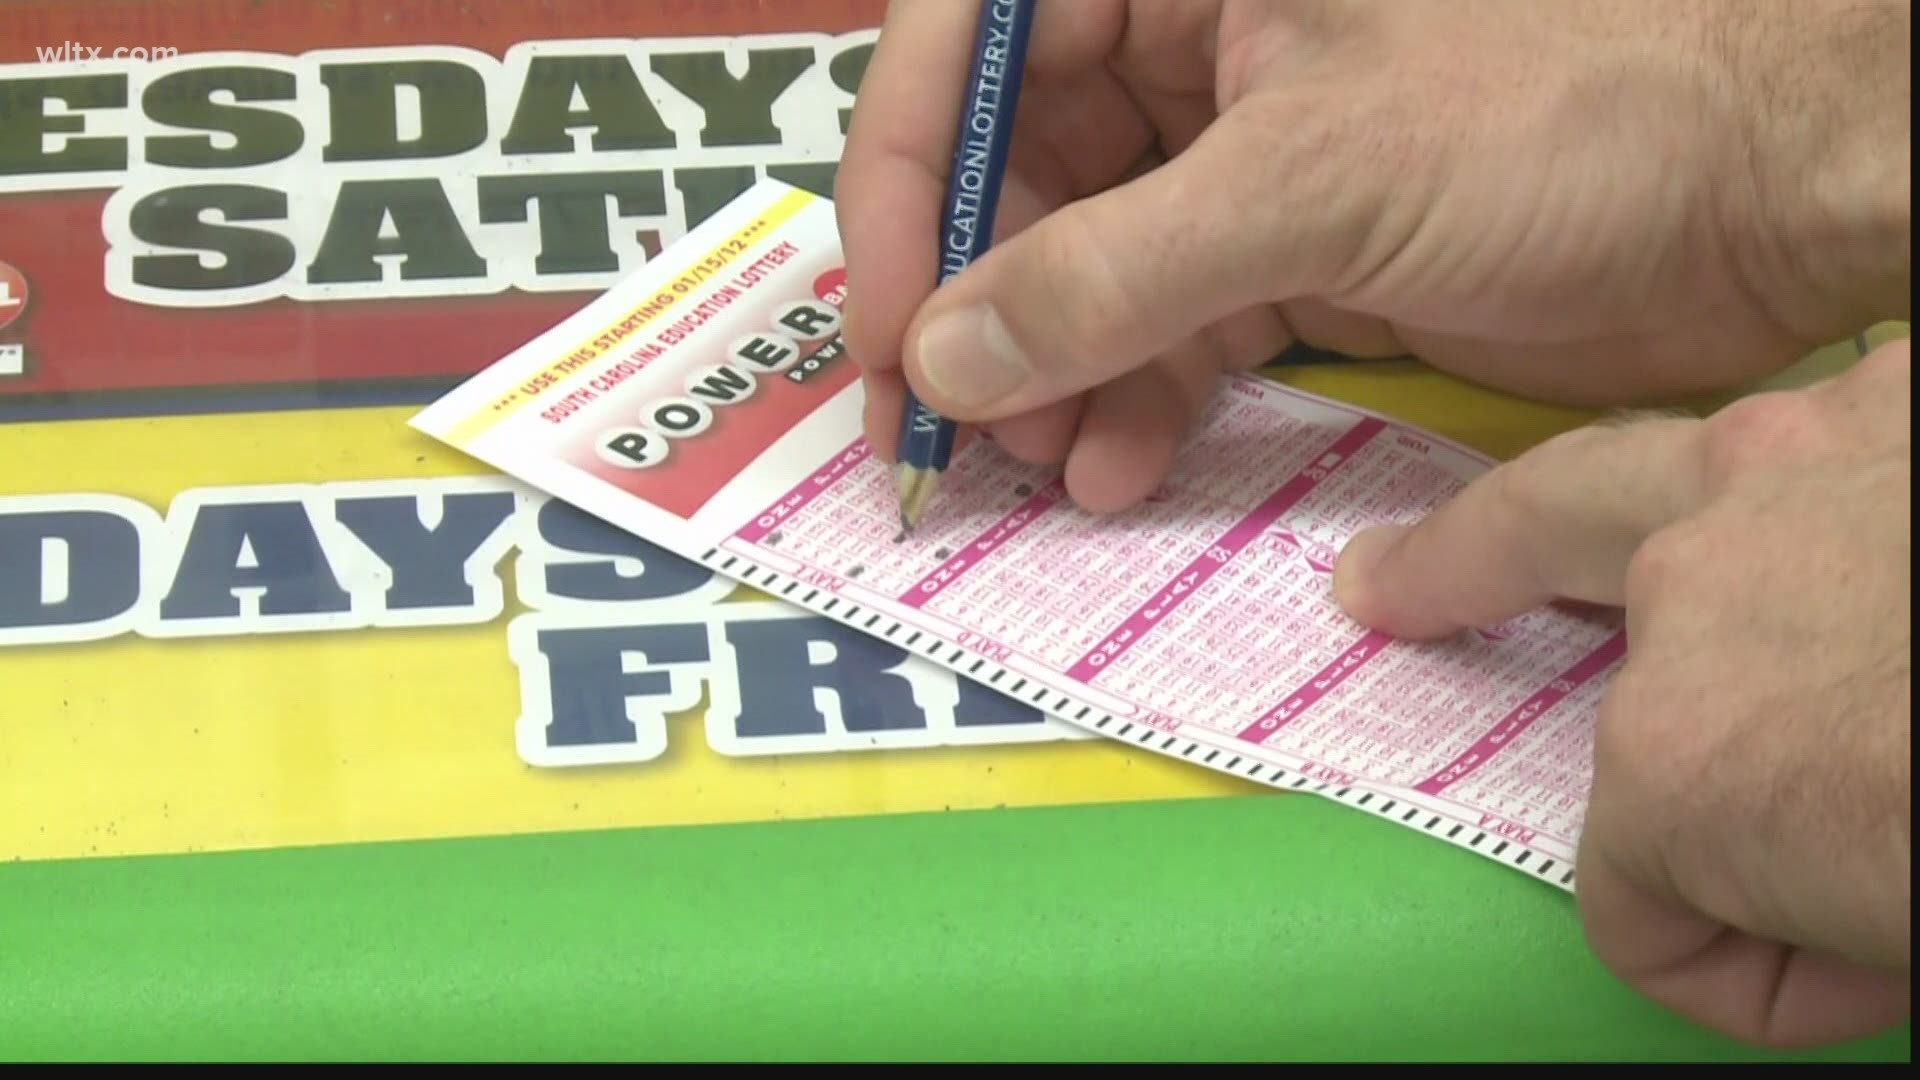 April 21 lottery drawing had two winners from South Carolina Midlands